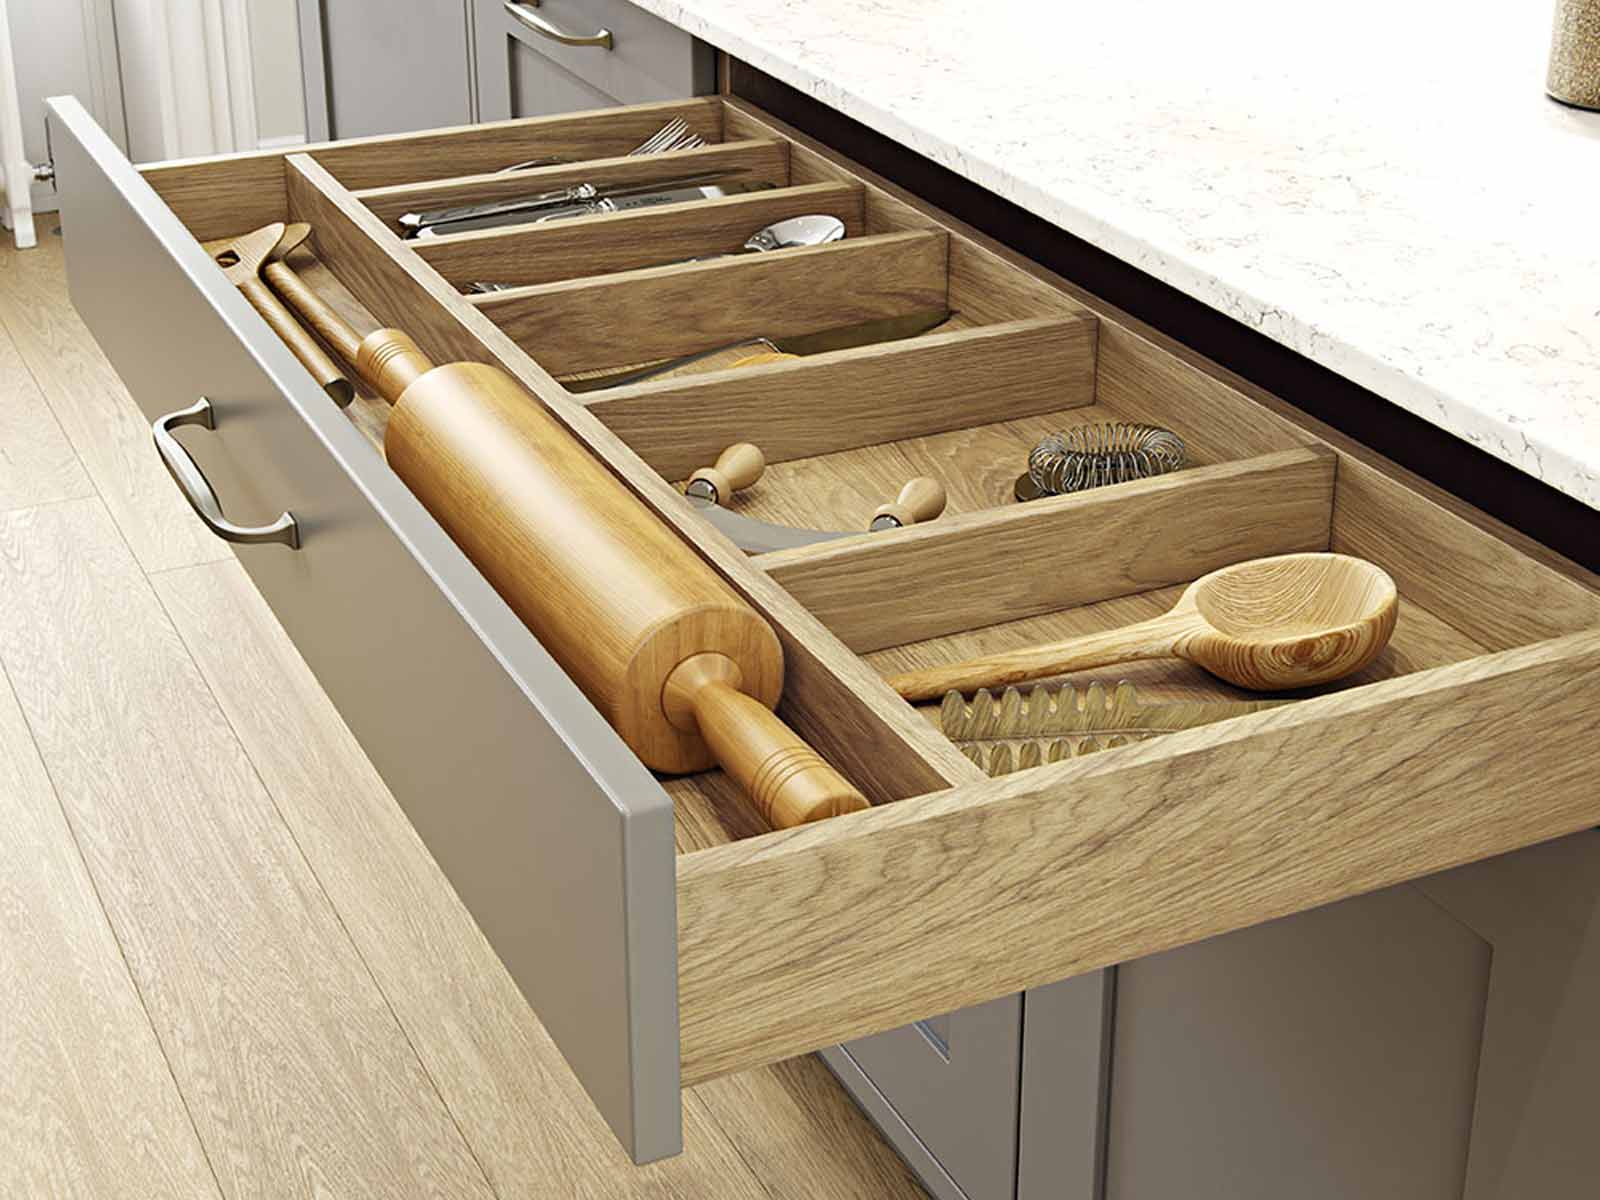 Wood kitchen drawer with cutlery drawer organiser in light strong oak